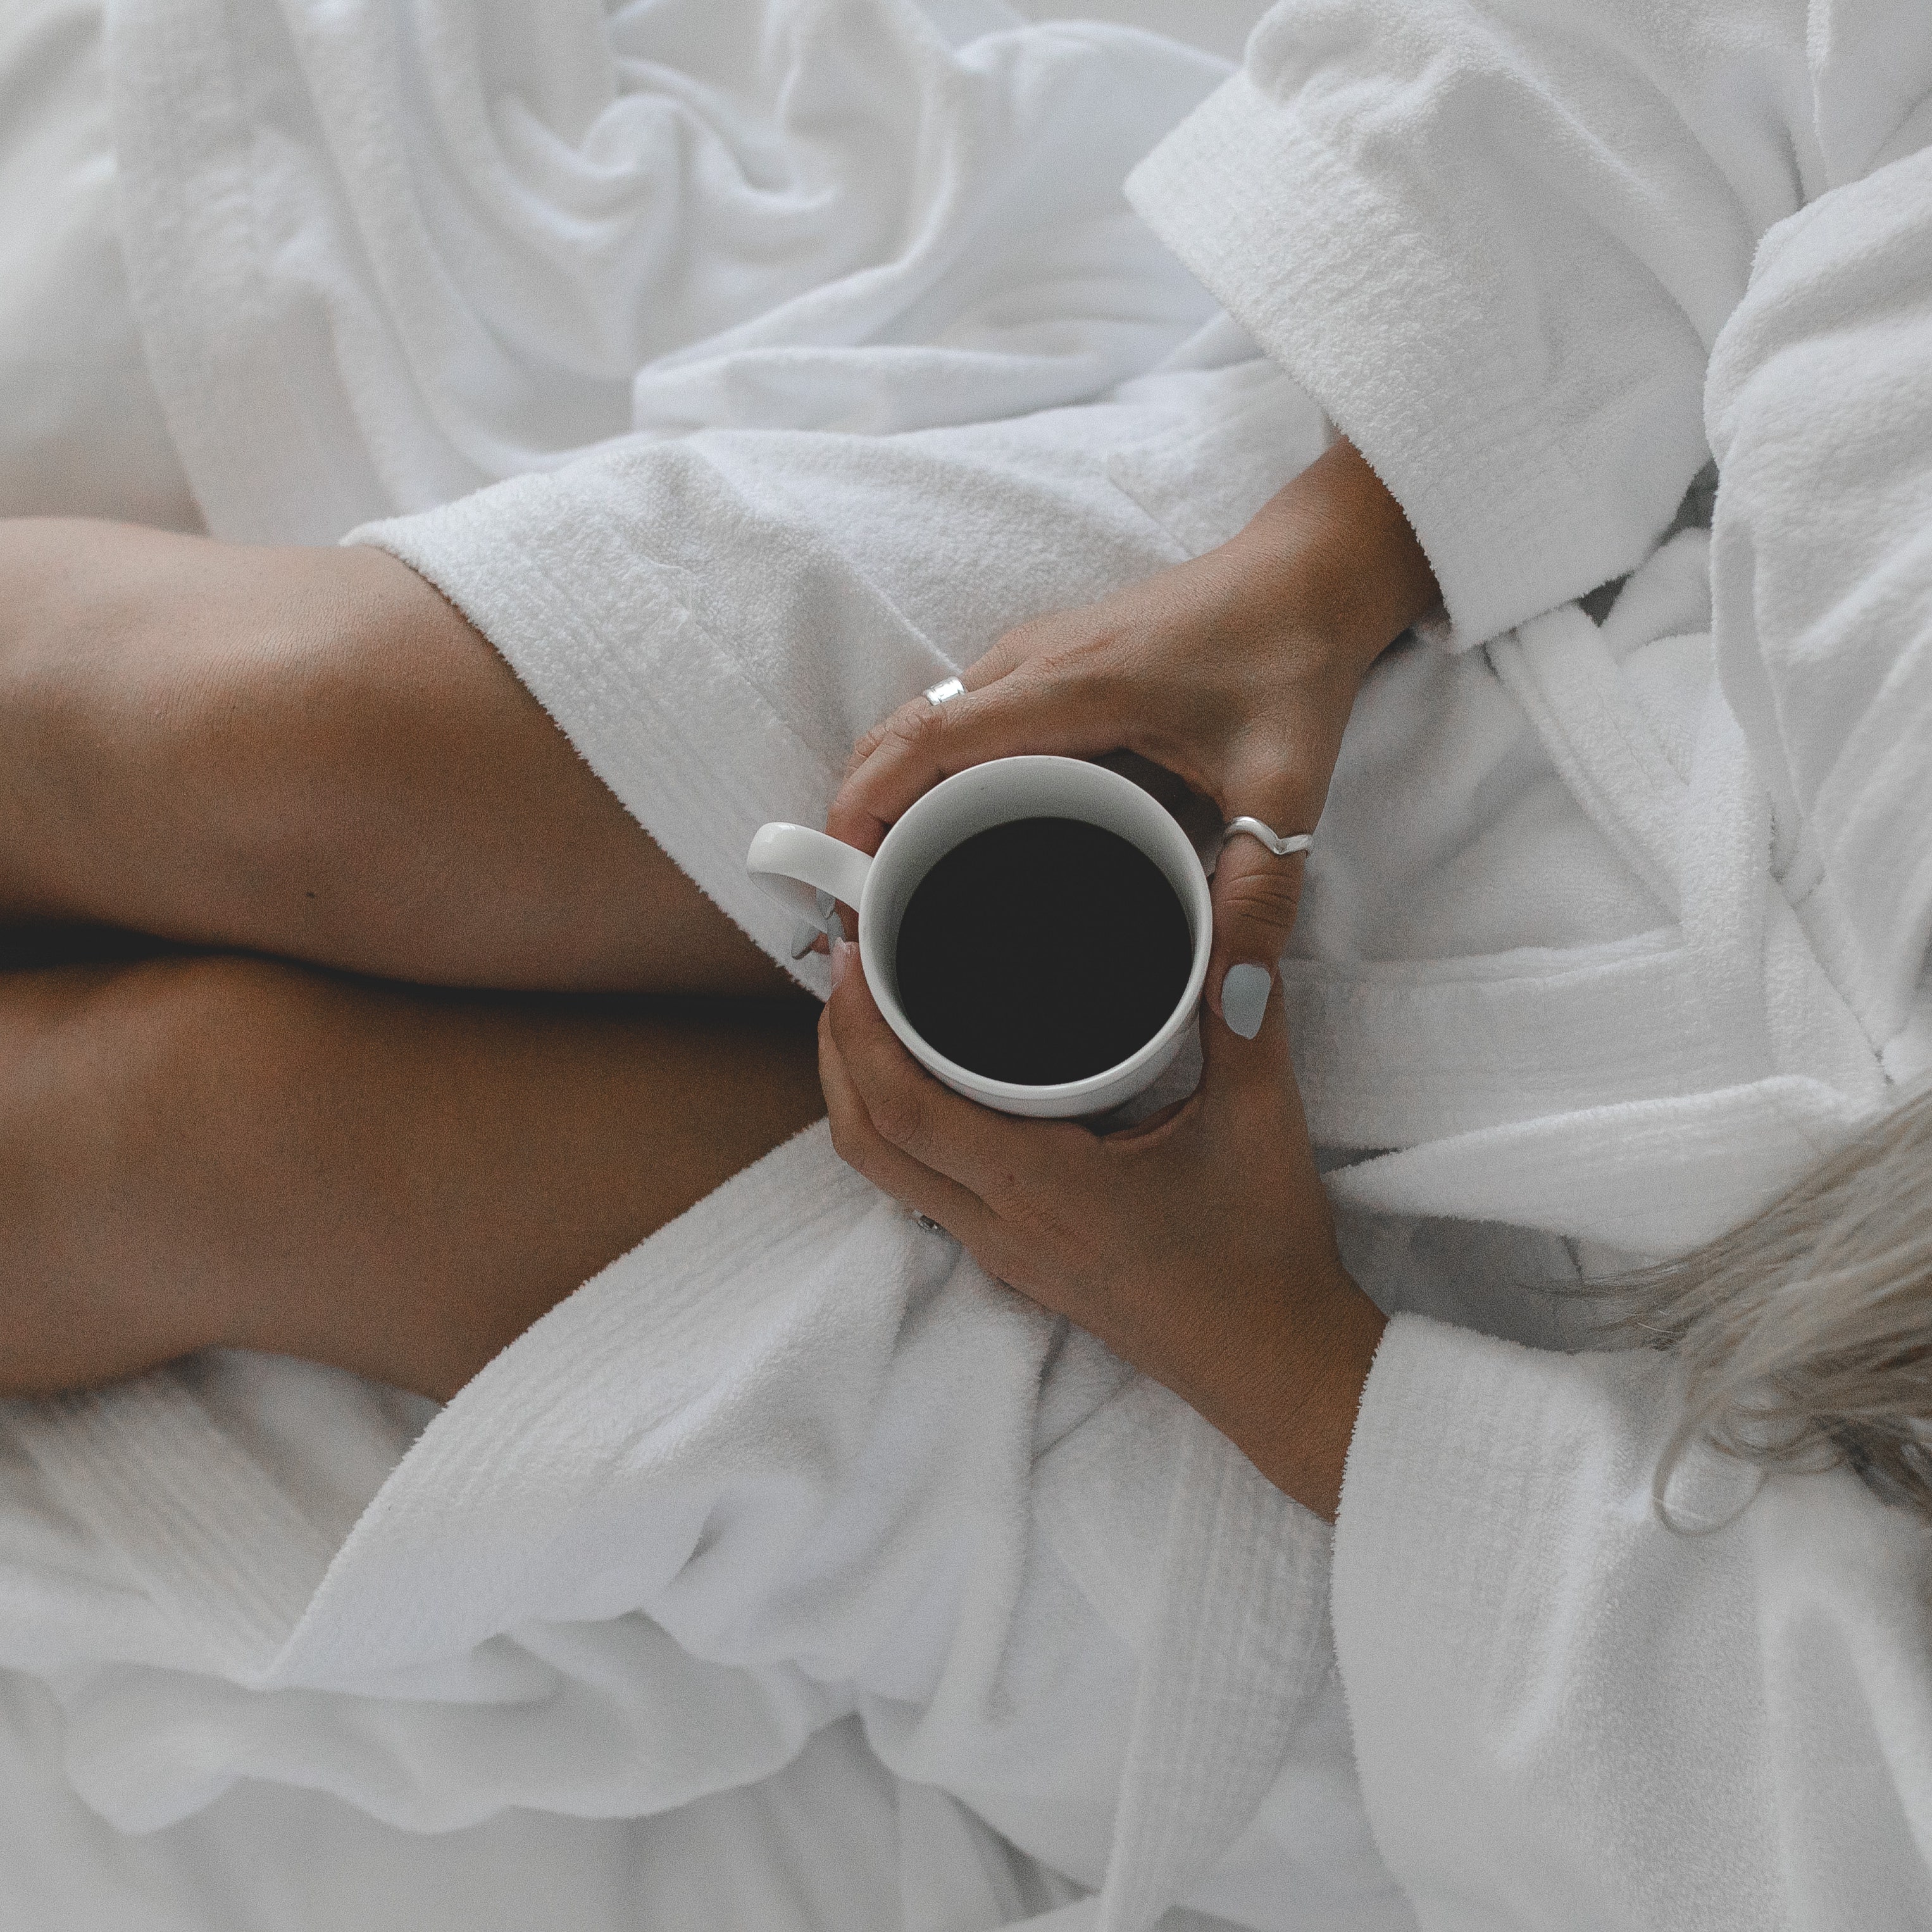 A young tanned woman sitting on a white bed in a white robe holding a coffee cup shot from above.